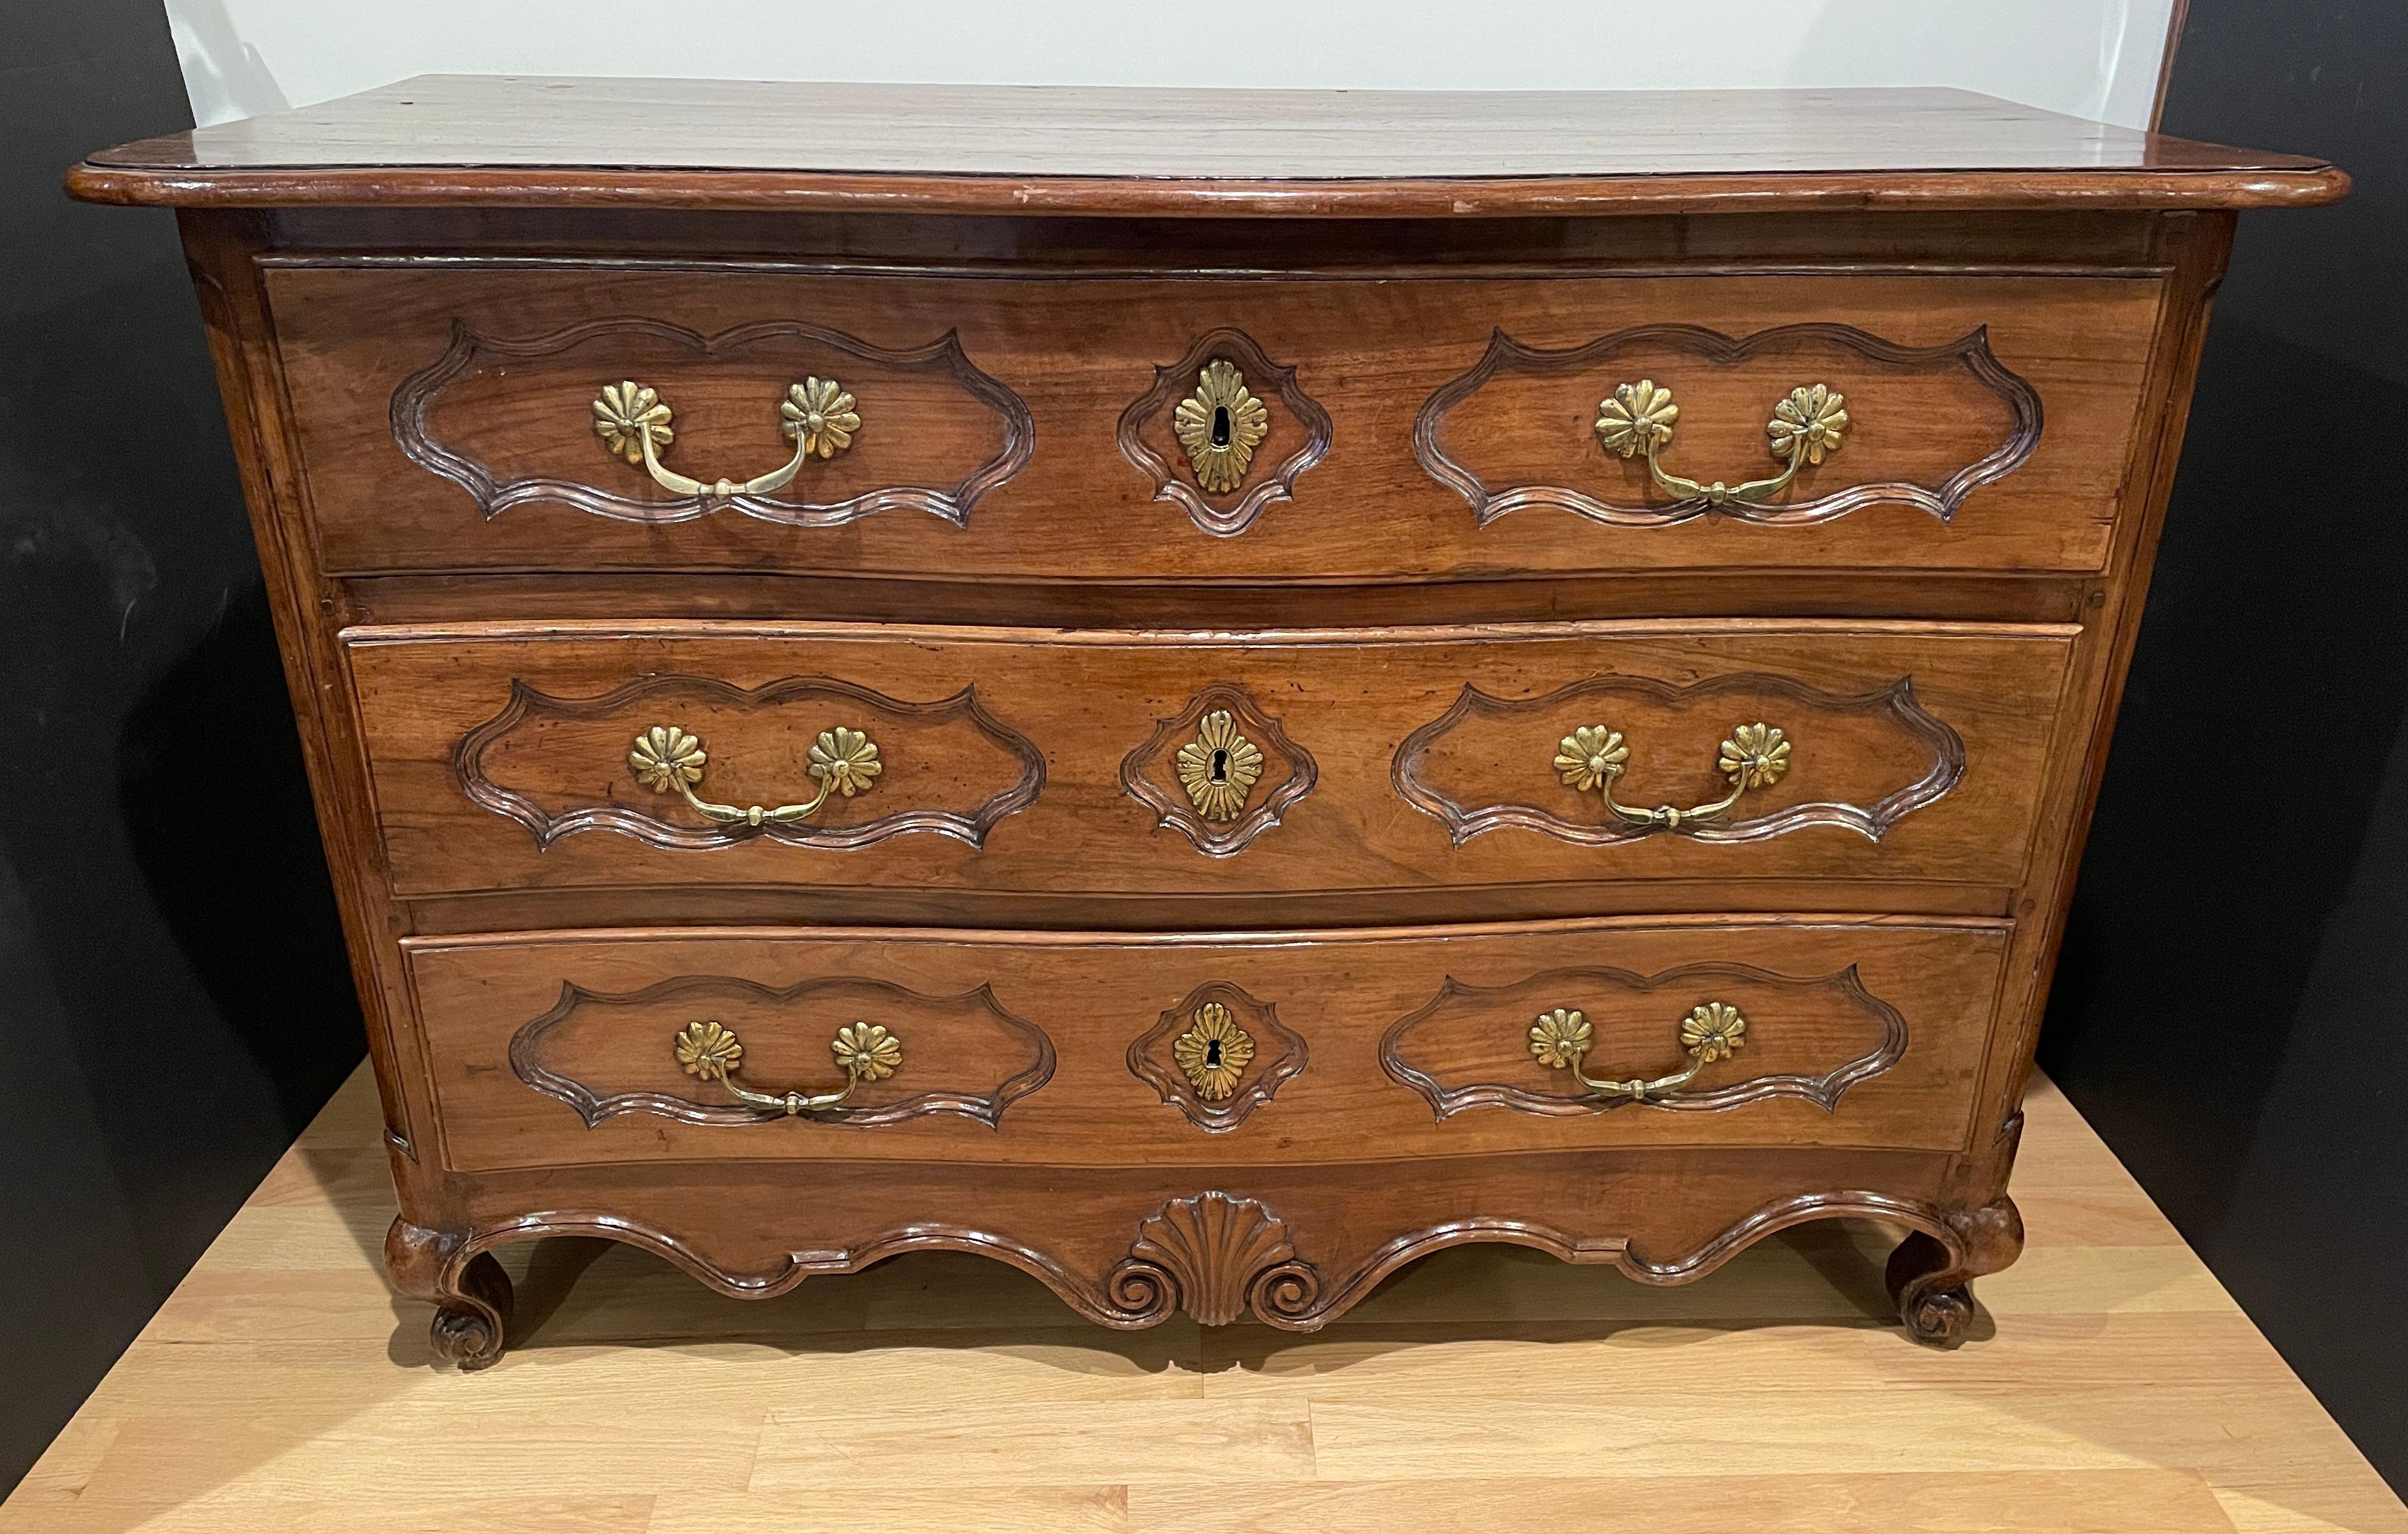 An 18th-century French Louis XV period serpentine-front fruitwood commode chest of three drawers, standing on elegantly carved feet. Distributed over three rows, each moulded drawer is decorated with original handles and escutcheons. Bottom